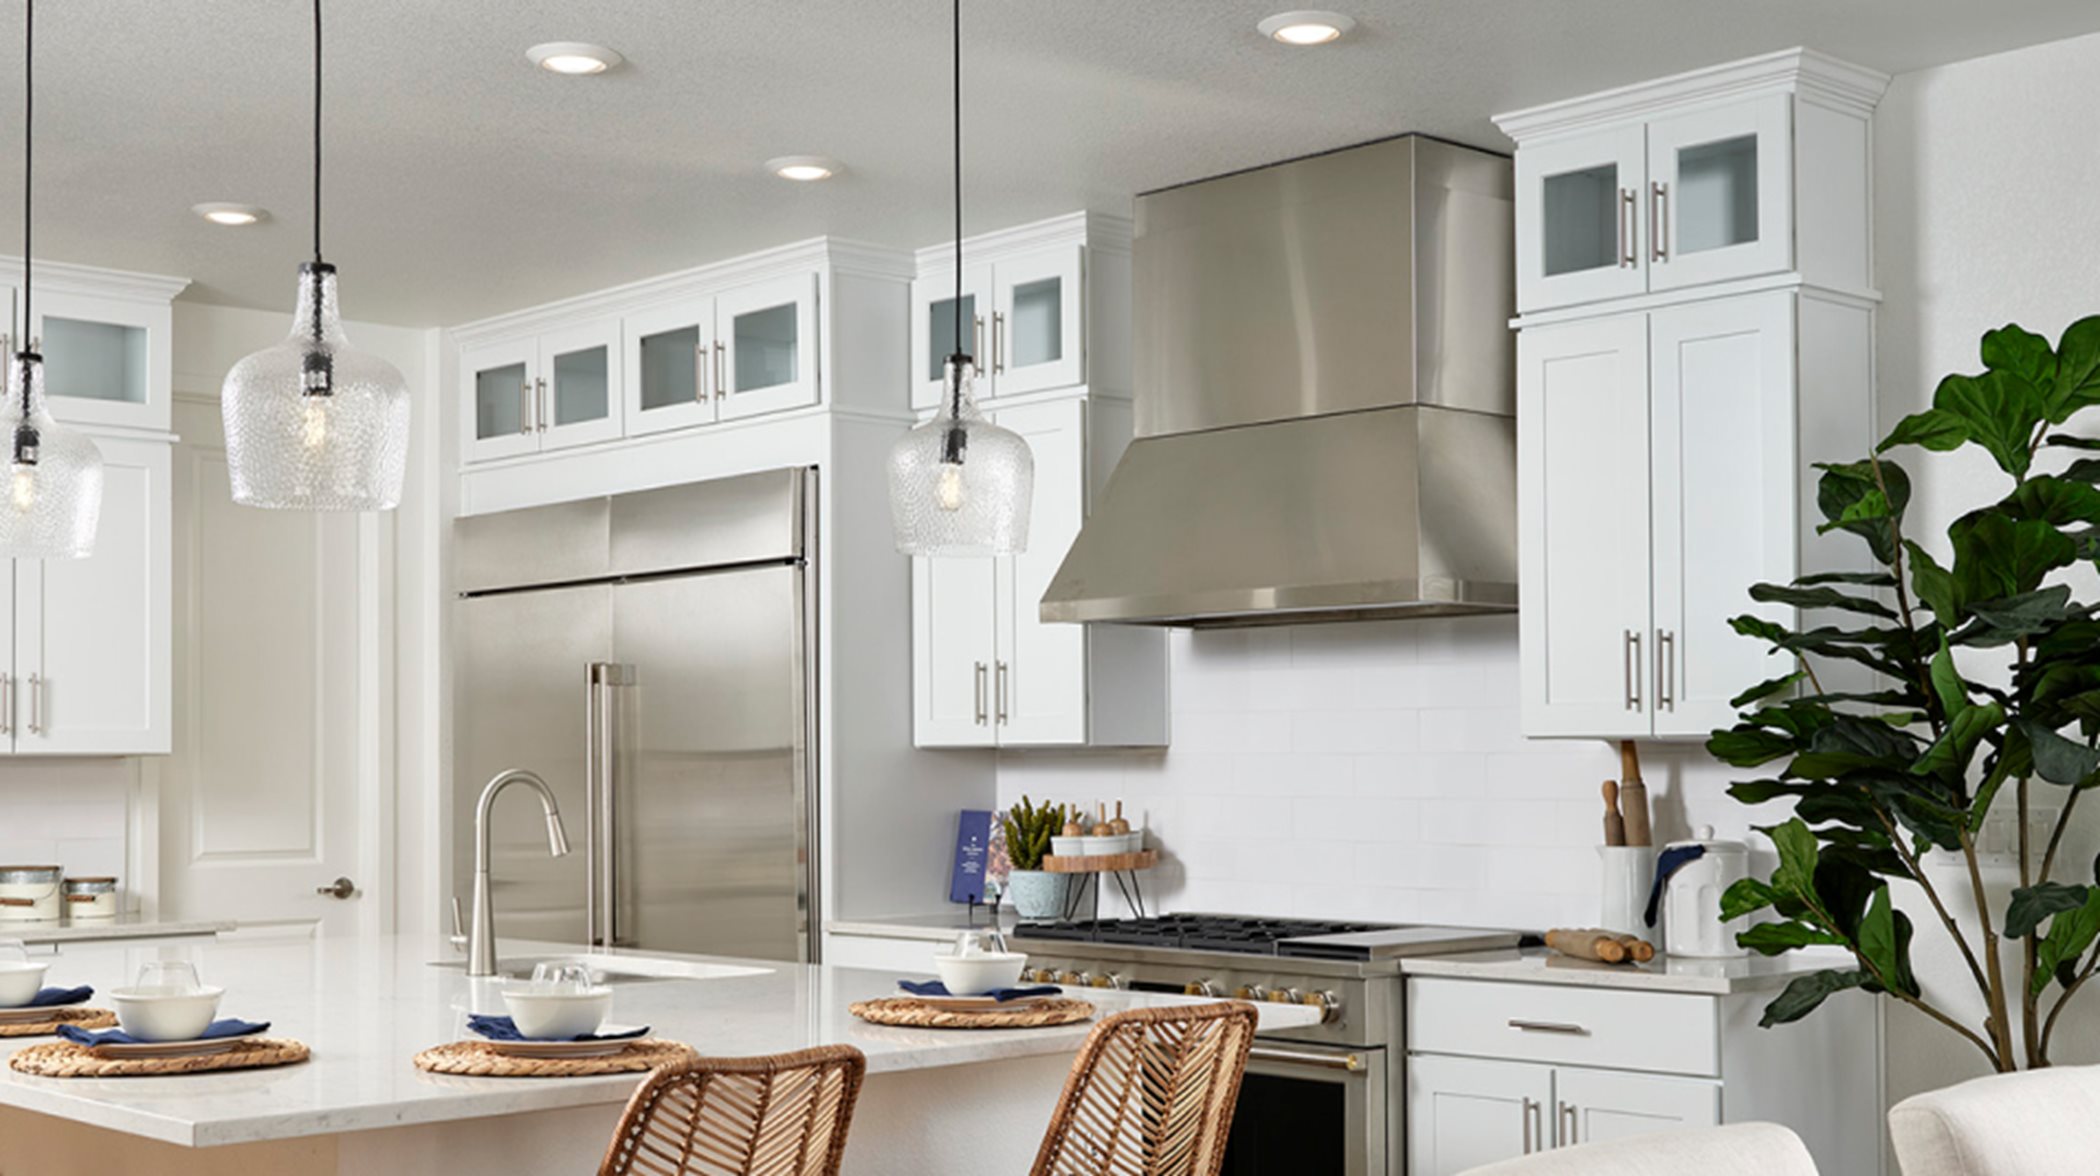 GE Monogram® stainless steel appliances included in the kitchen 